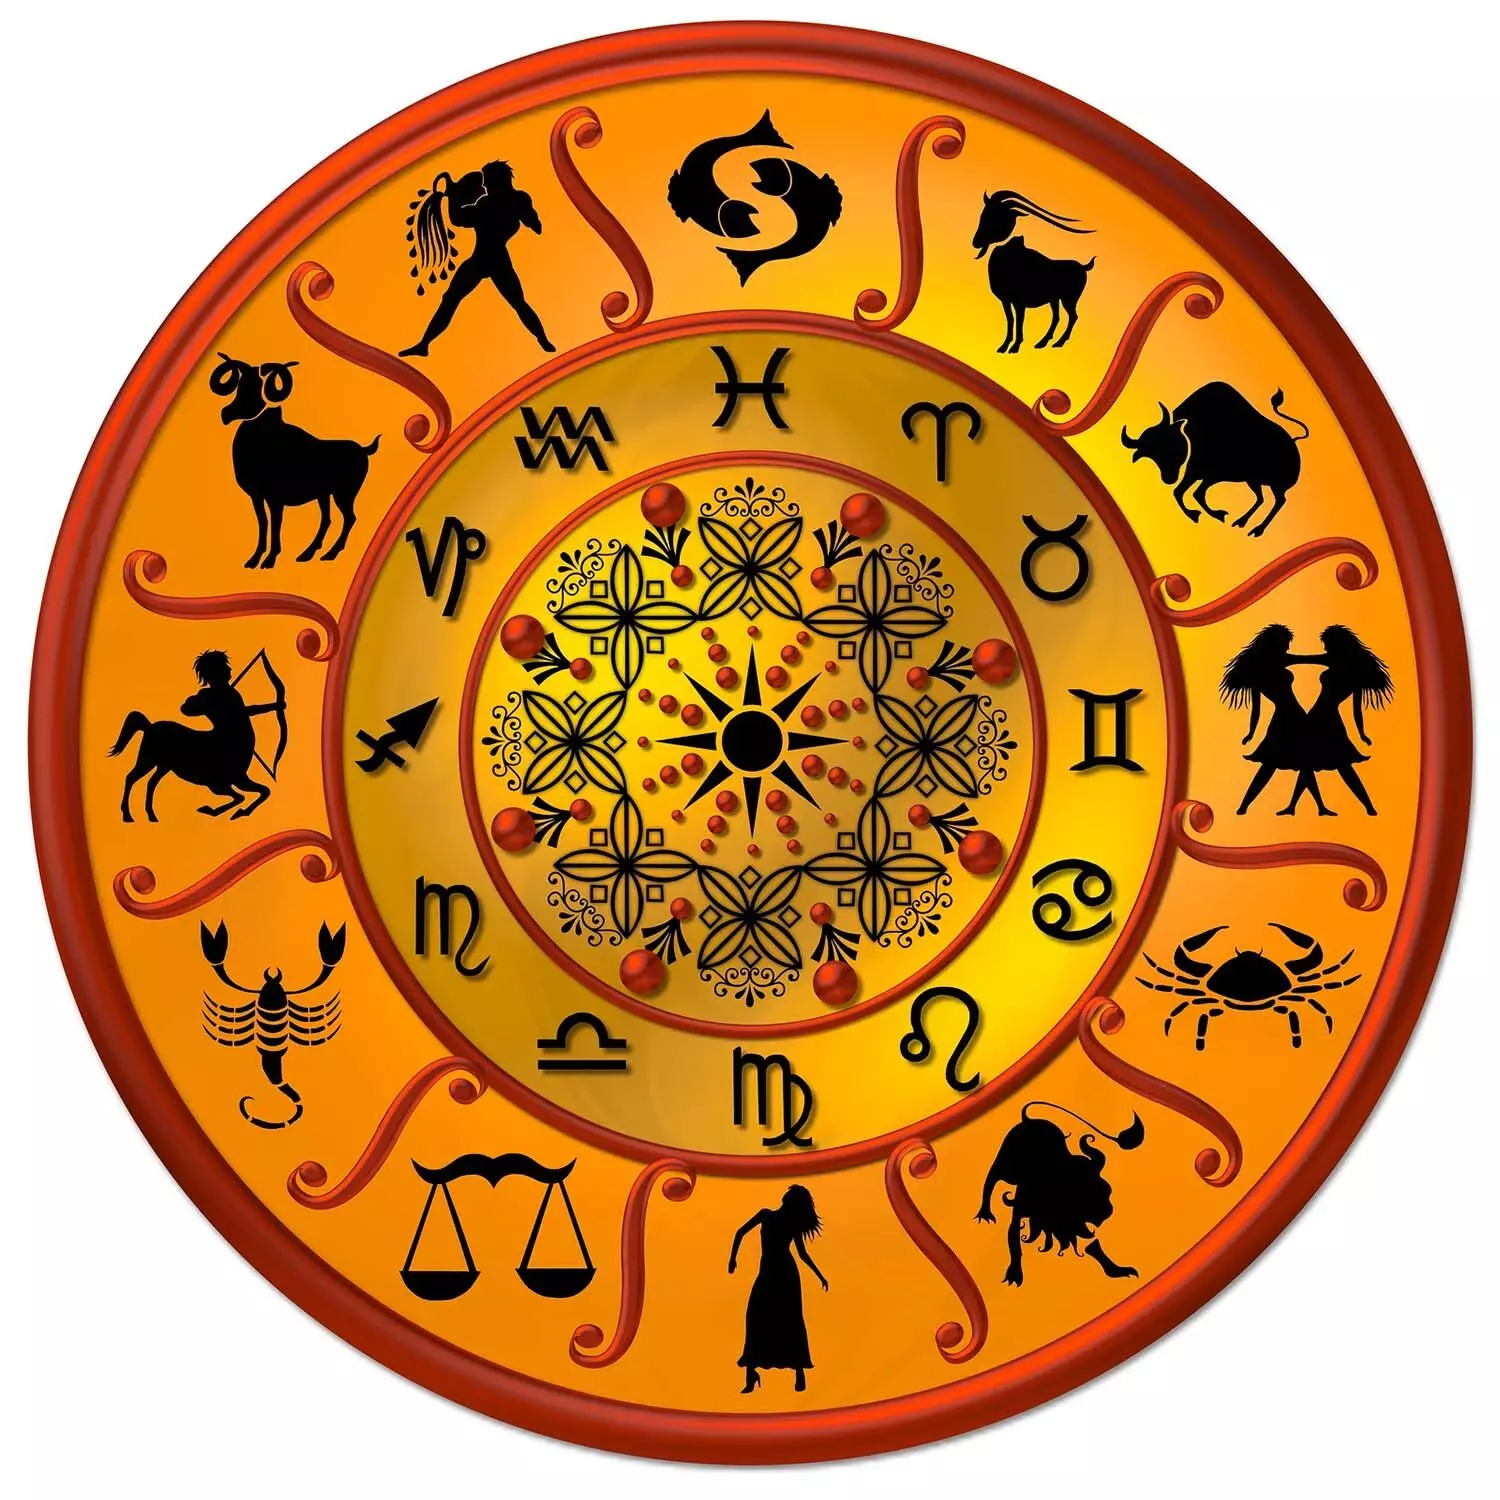 07 August  – Know your todays horoscope